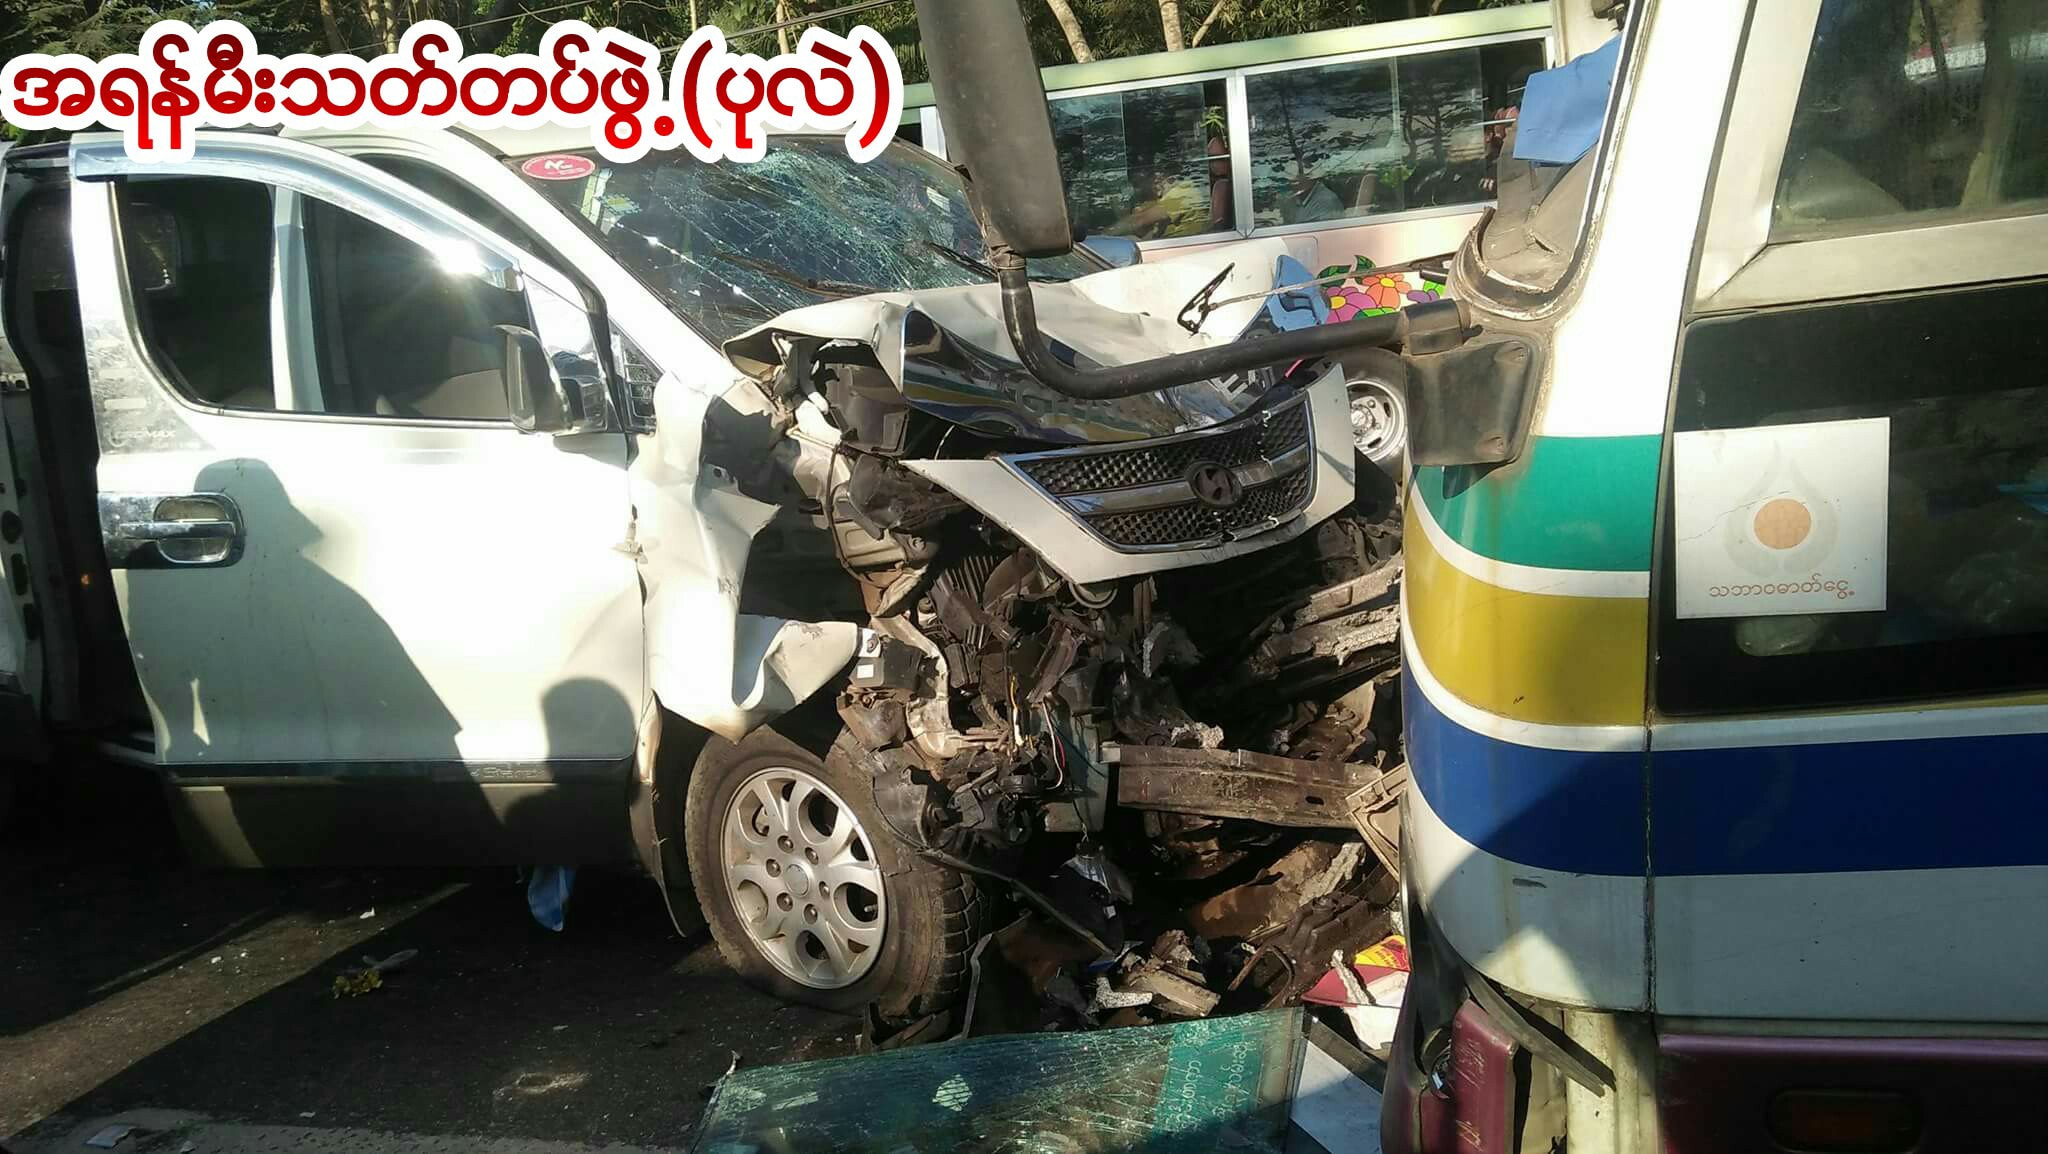 The aftermath of a crash between a YBS bus and a passenger van in Mingaladon Township on Jan. 8, 2018. Photo: PVFB